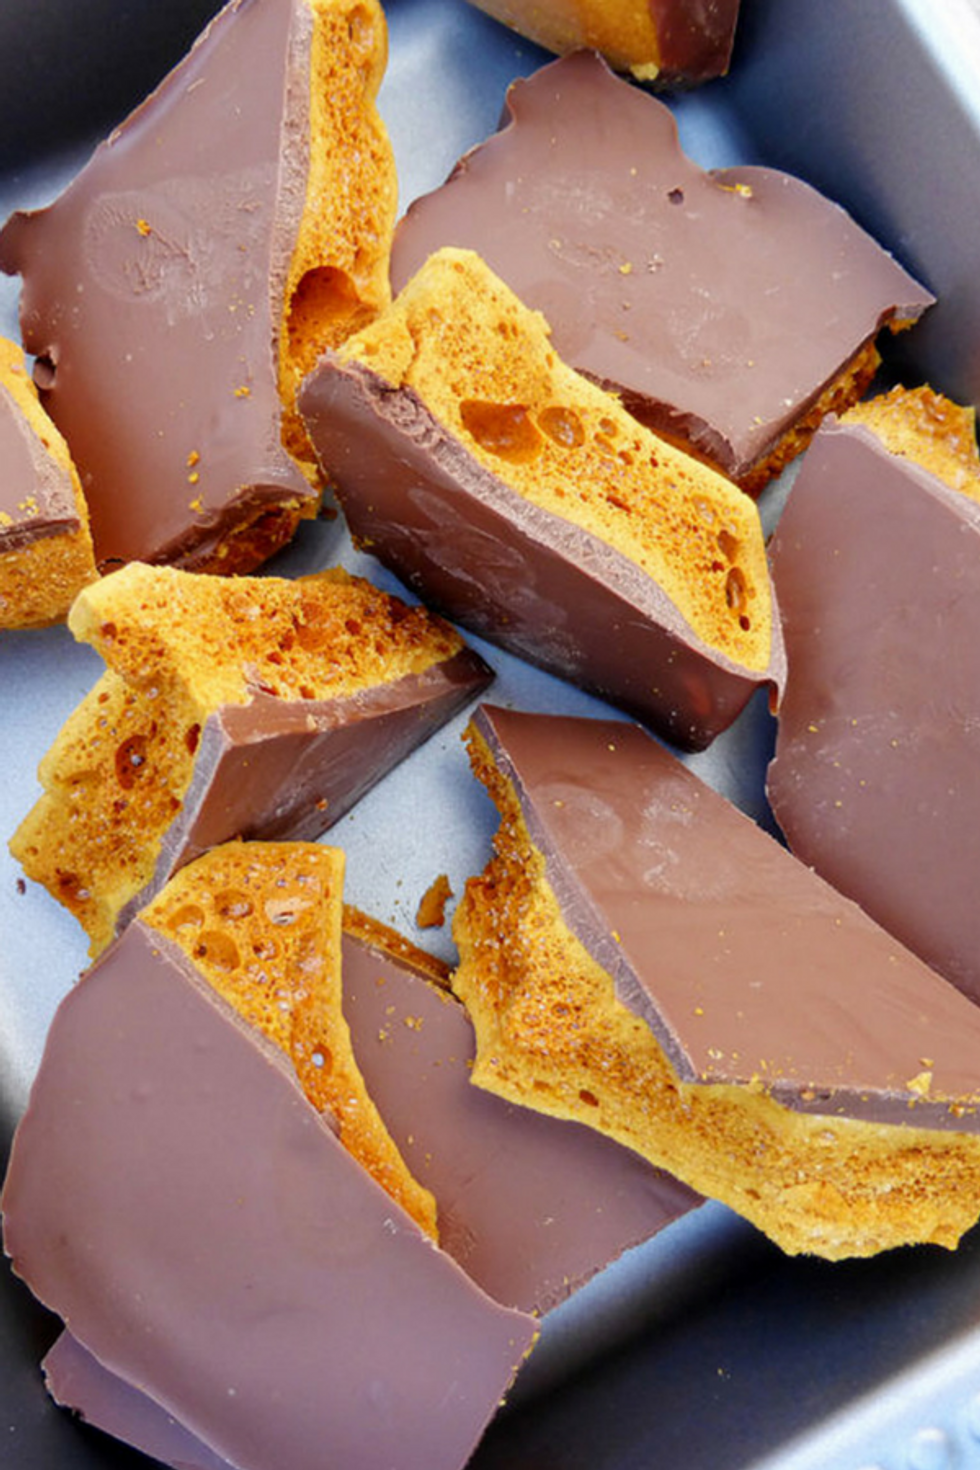 Chocolate (also known as Cinder Toffee) My